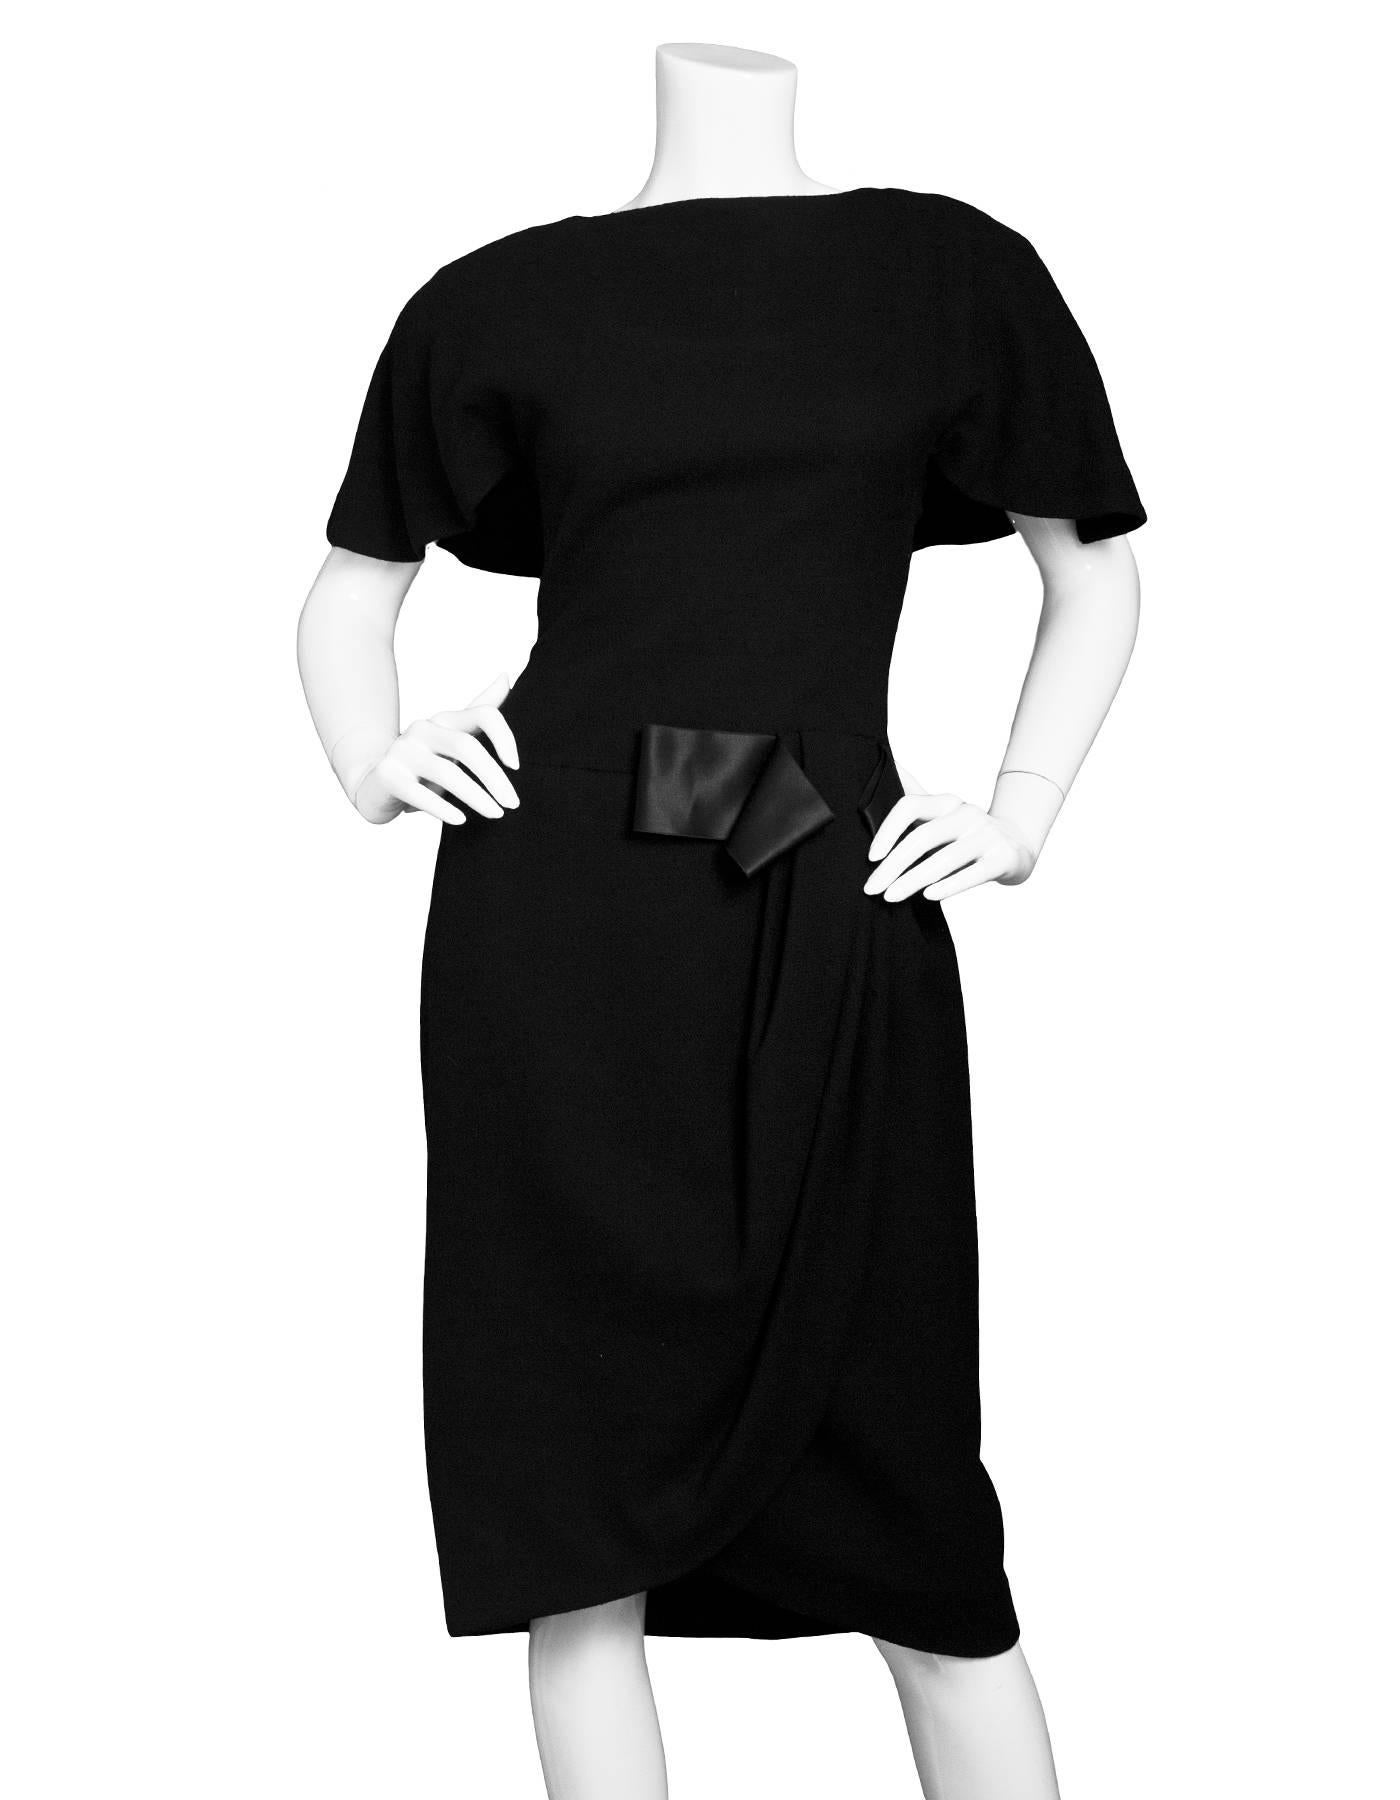 Scassi Vintage Black Flutter Sleeve Wool Dress
Features gathering and bow at waist and cape style back with button down closure at neckline

Made In: USA
Color: Black
Composition: Believed to be a wool-blend
Lining: Black, silk